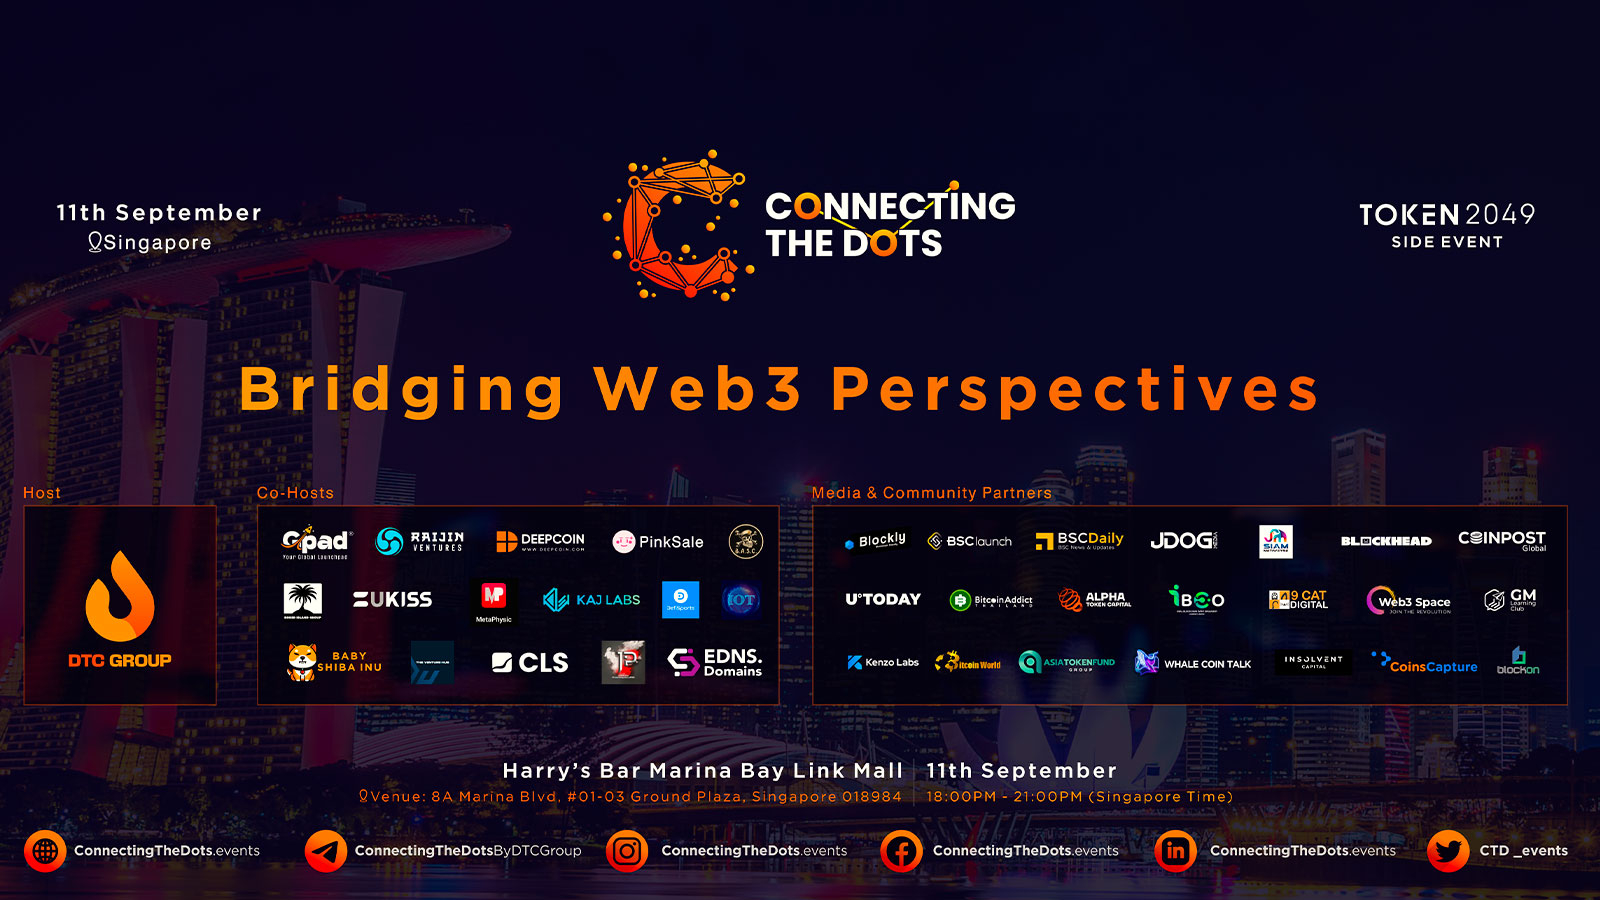 Connecting the Dots - Bridging Web3 Perspectives, Token2049 Official Side Event by DTC Group